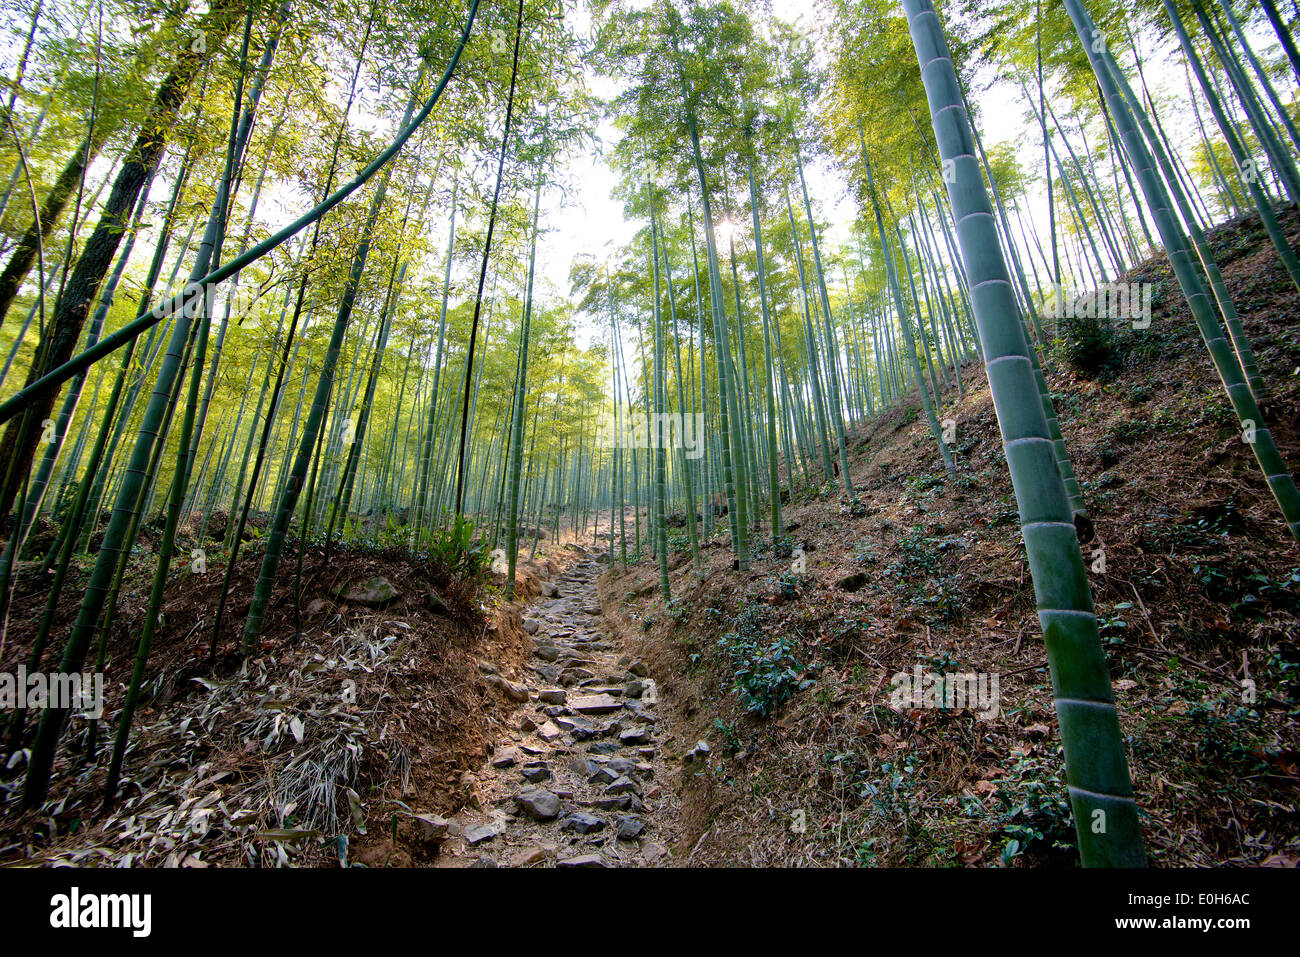 The flourish bamboo forest with path Stock Photo